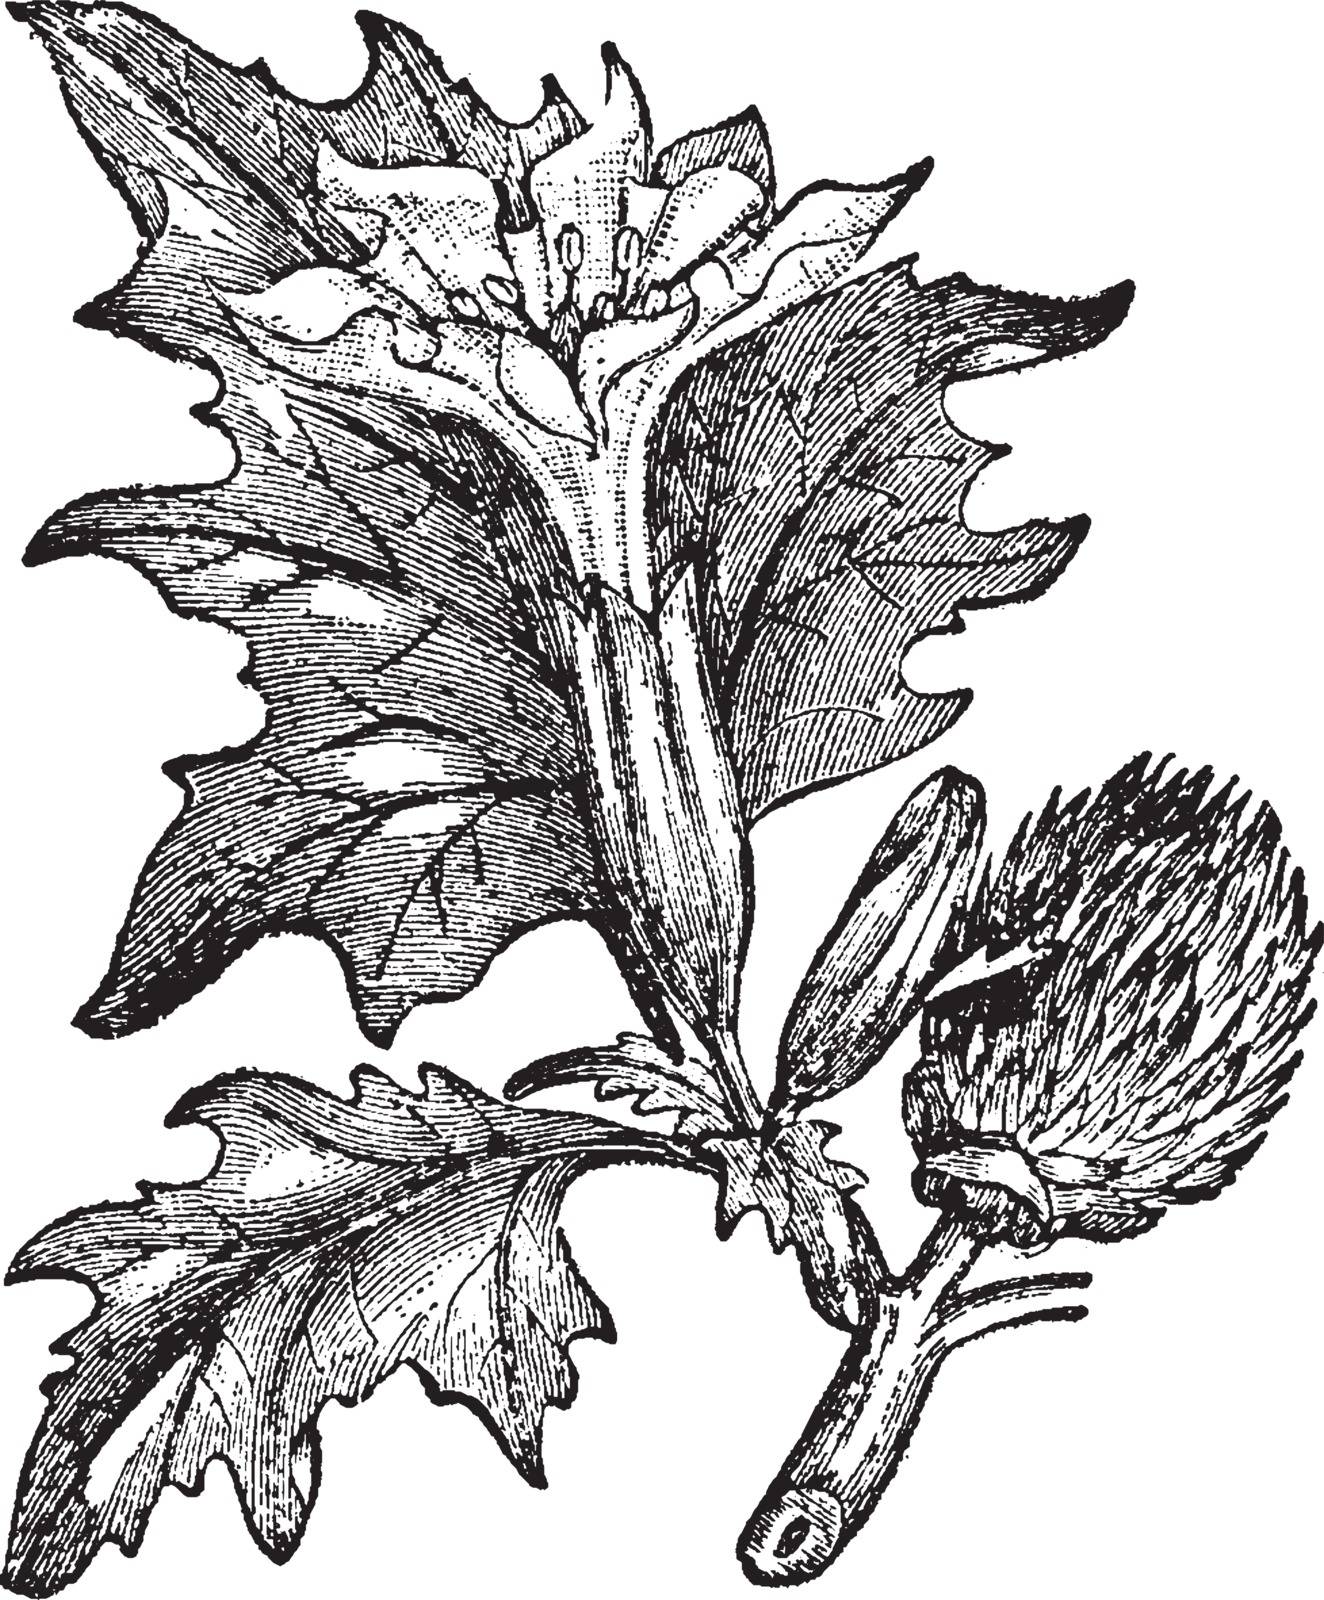 The Thorn Apple leaves are long, toothed. The flowers are trumpet-shaped, and oval shaped bud capsule, vintage line drawing or engraving illustration.